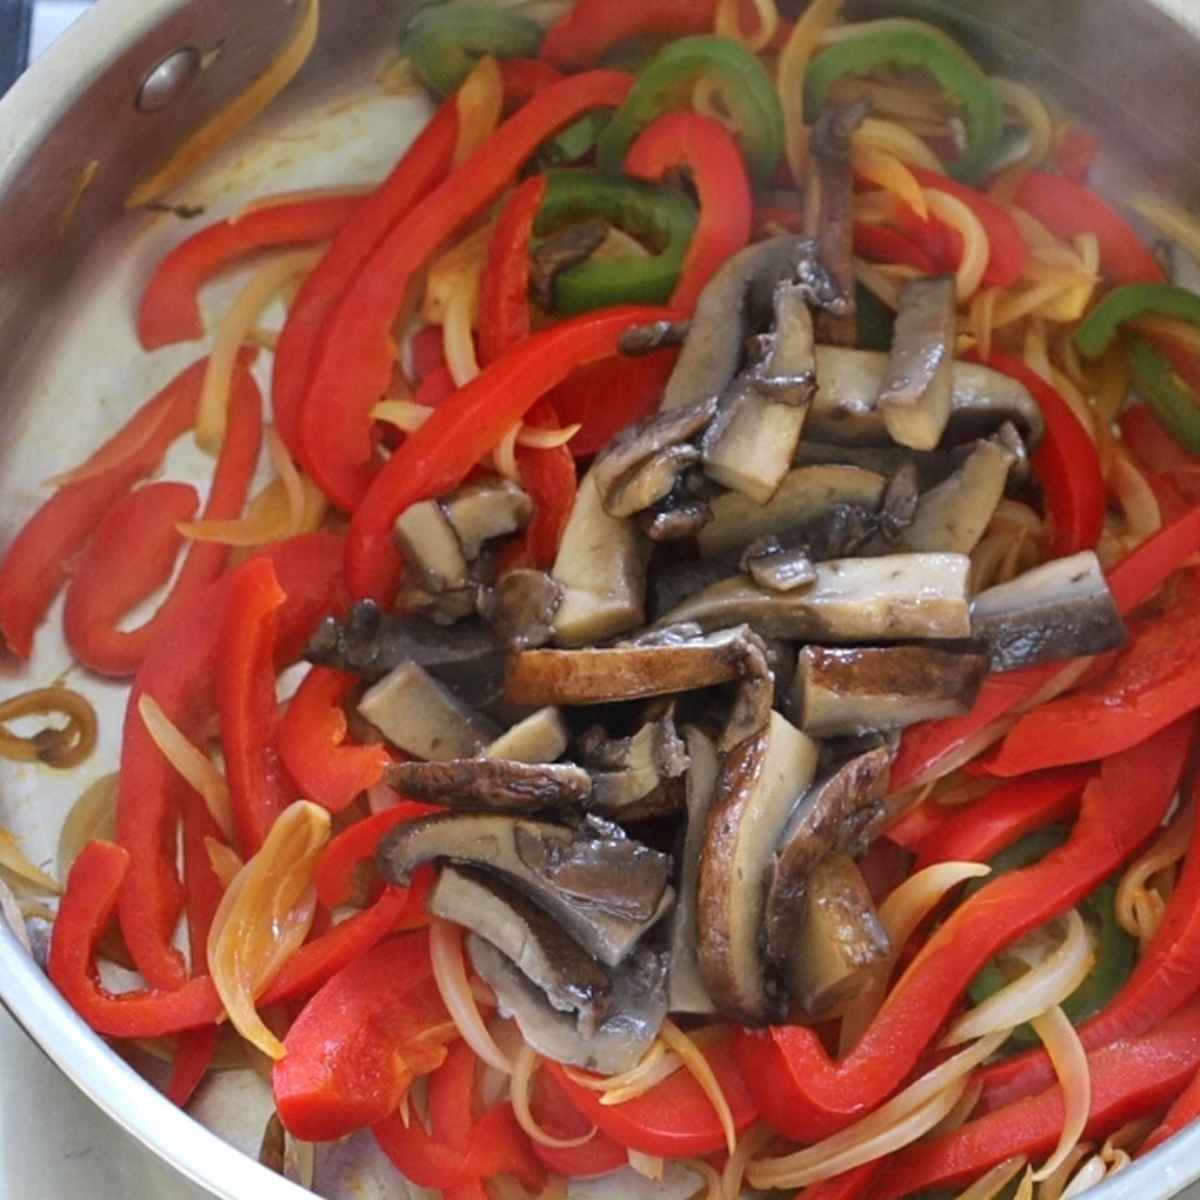 Red peppers, green jalapenos, brown portobello mushrooms all sliced and sauteed in a stainless steel skillet.